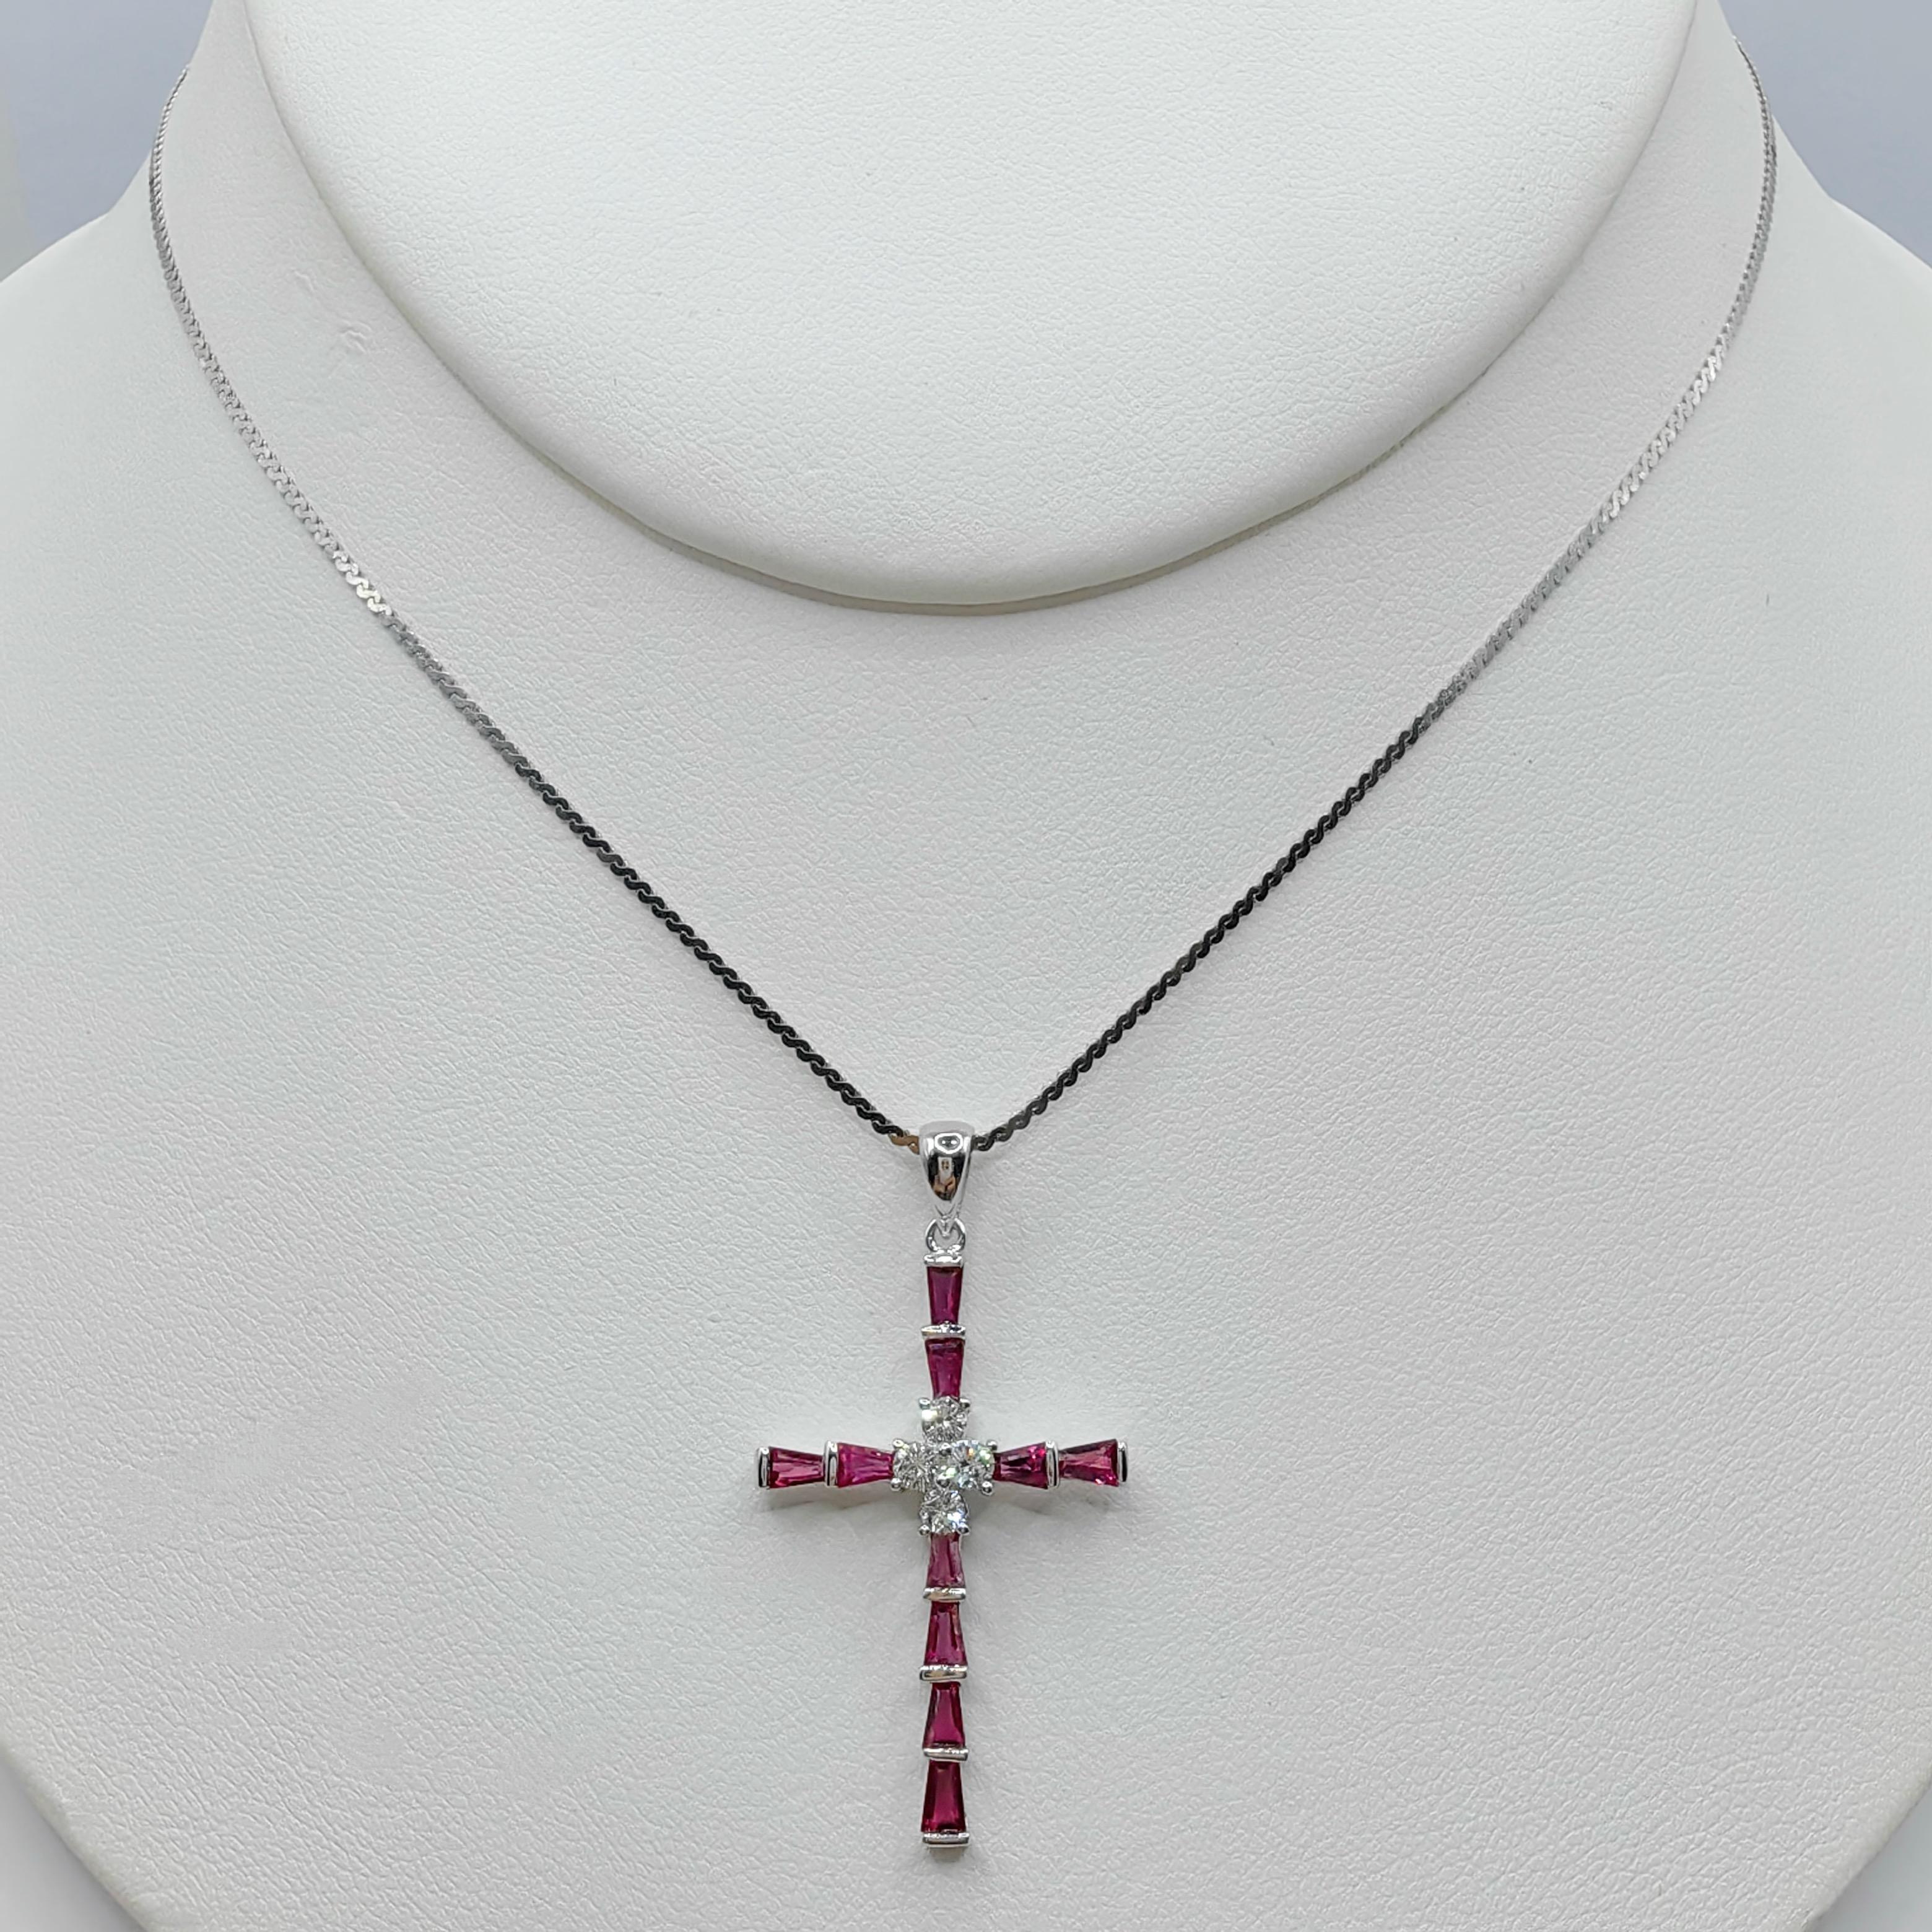 1.26ct Pigeon Blood Ruby & Diamond Cross Necklace Pendant in 18K White Gold 3